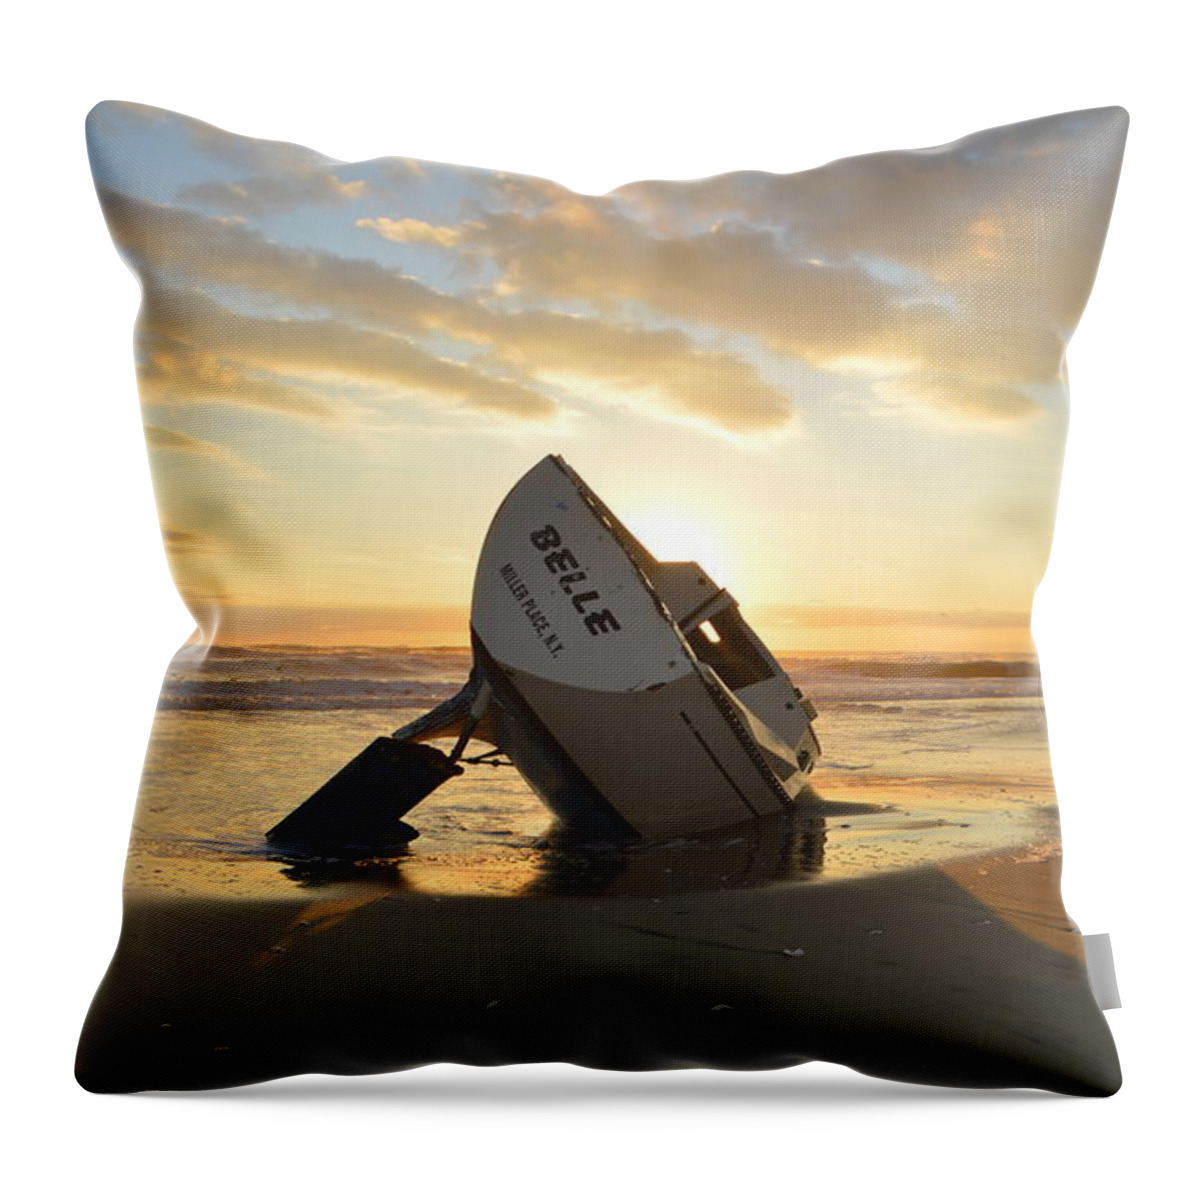 Obx Sunrise Throw Pillow featuring the photograph Belle at Sunrise by Barbara Ann Bell